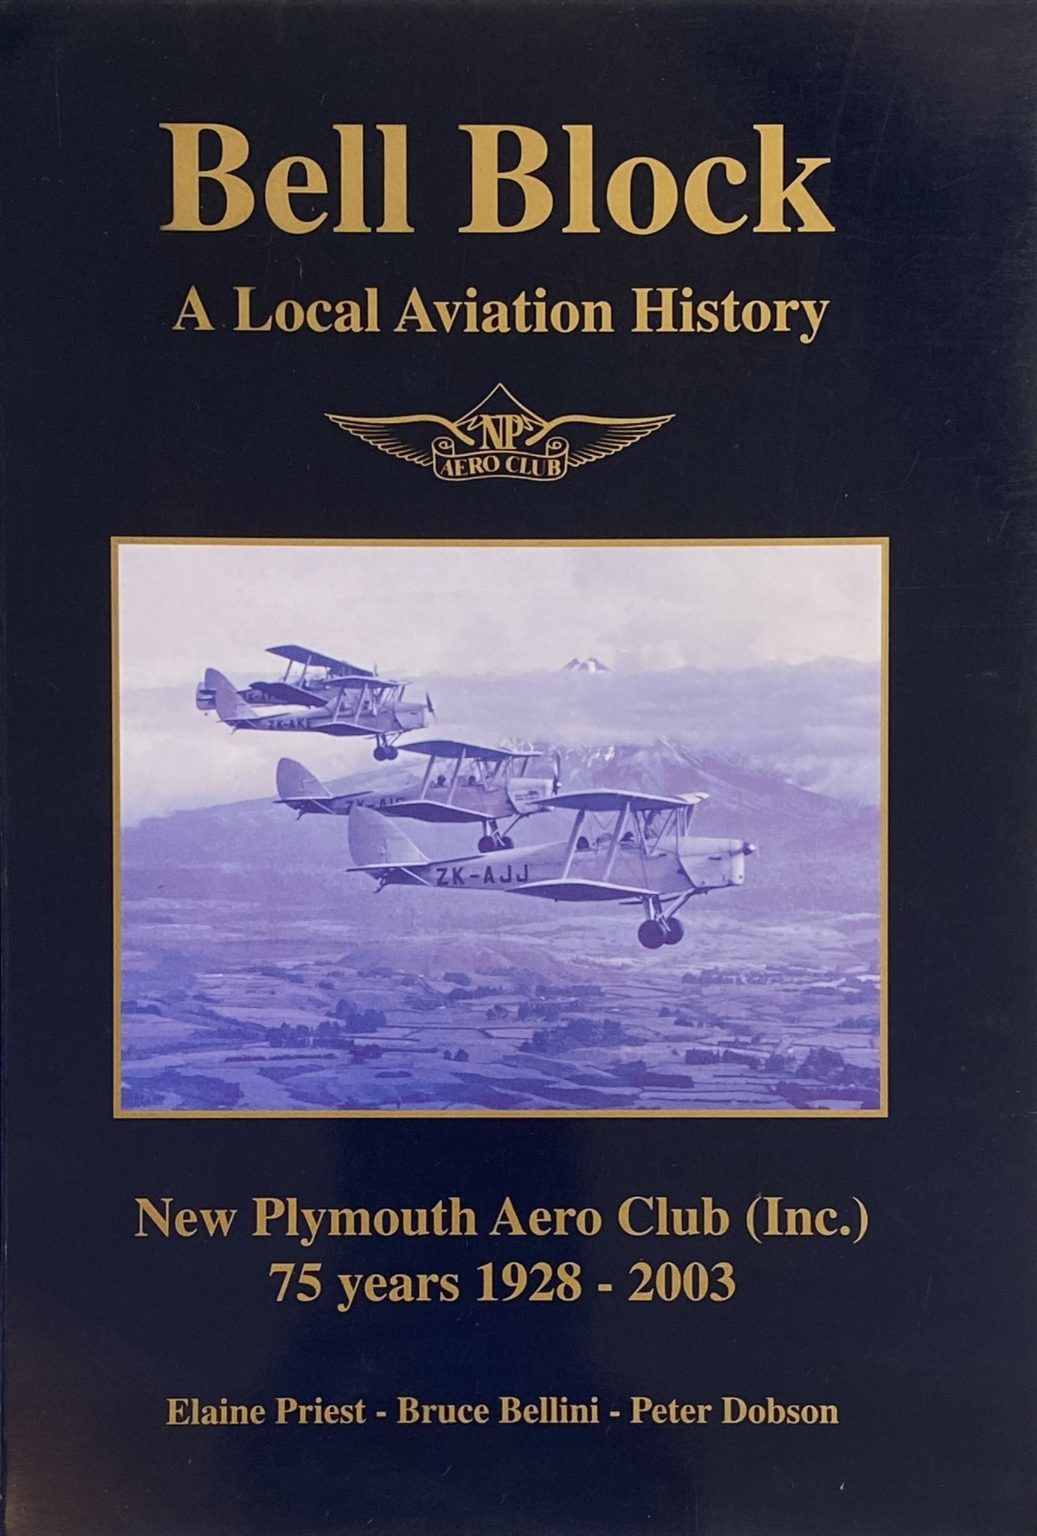 BELL BLOCK: A Local Aviation History - New Plymouth Aero Club 75 years 1928-2003